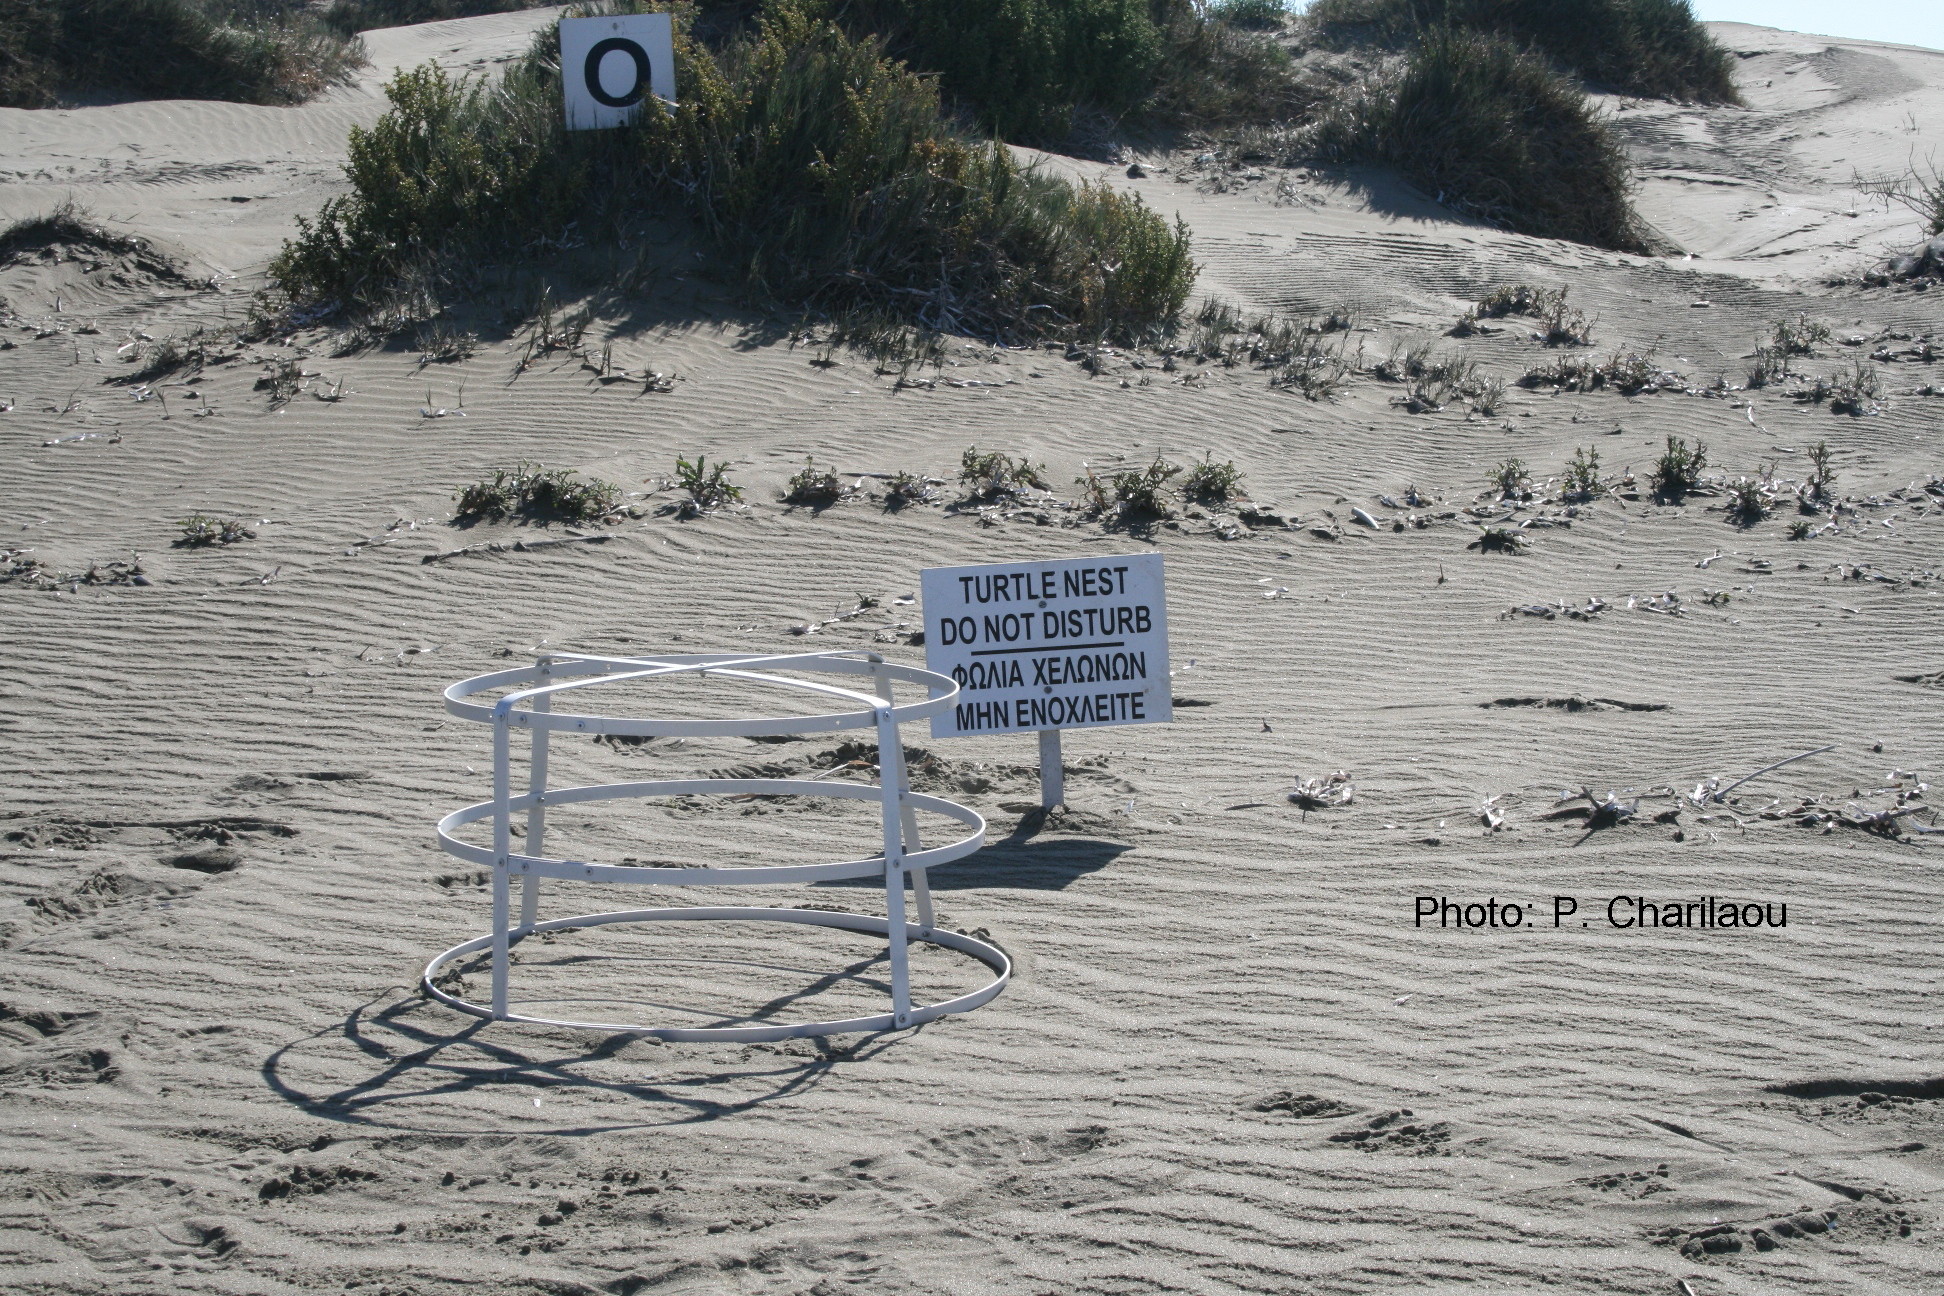 Image shows turtle nesting do not disturb sign on the beach.